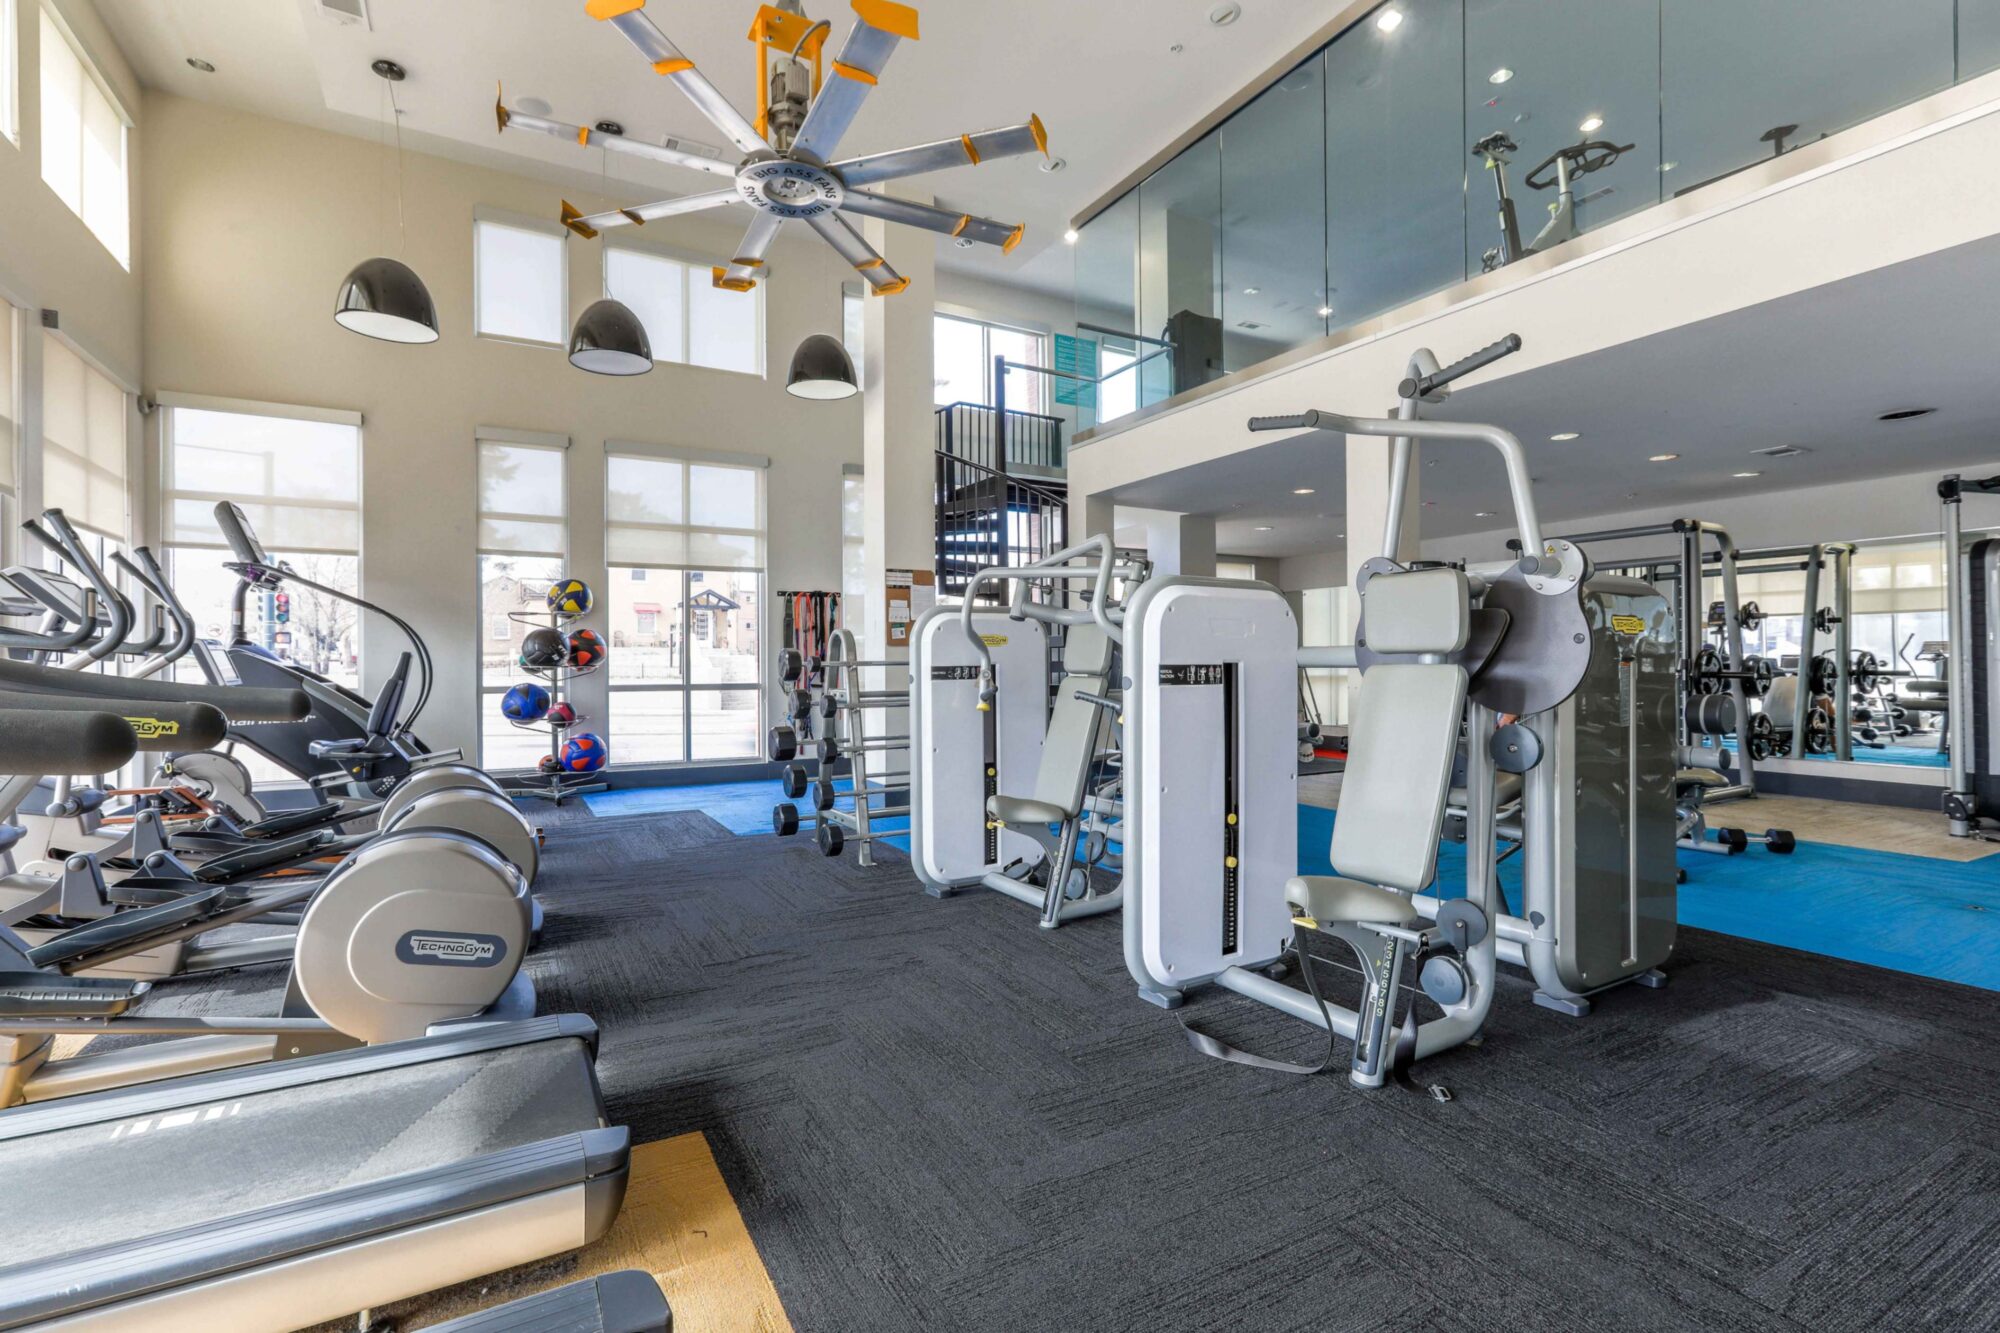 Fitness center with strength training equipment, cardio machines, and free weights